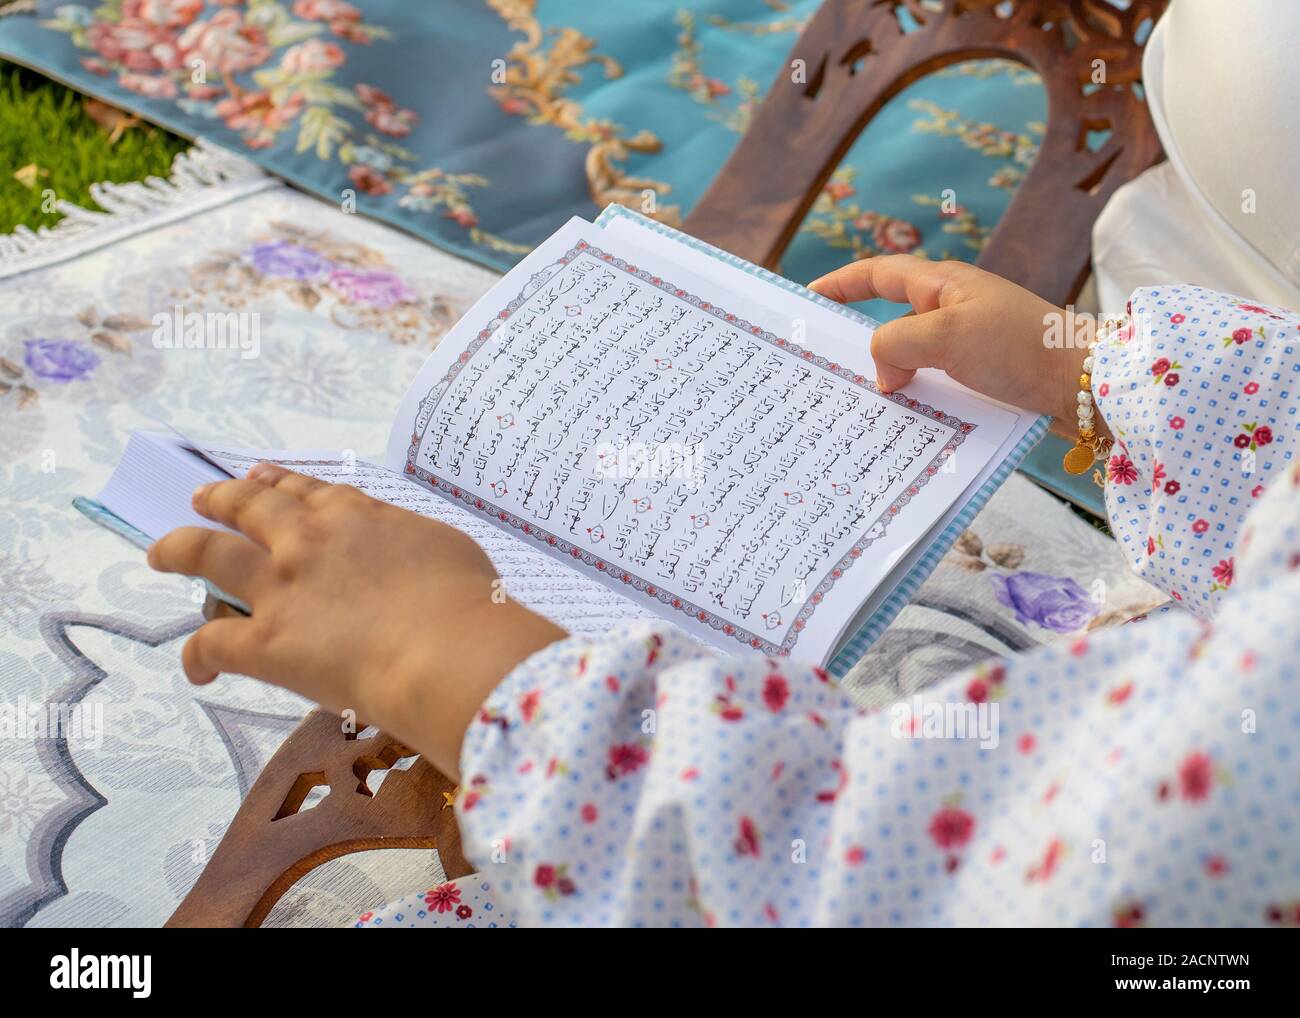 A woman in a headscarf reading a book photo – Prayer Image on Unsplash